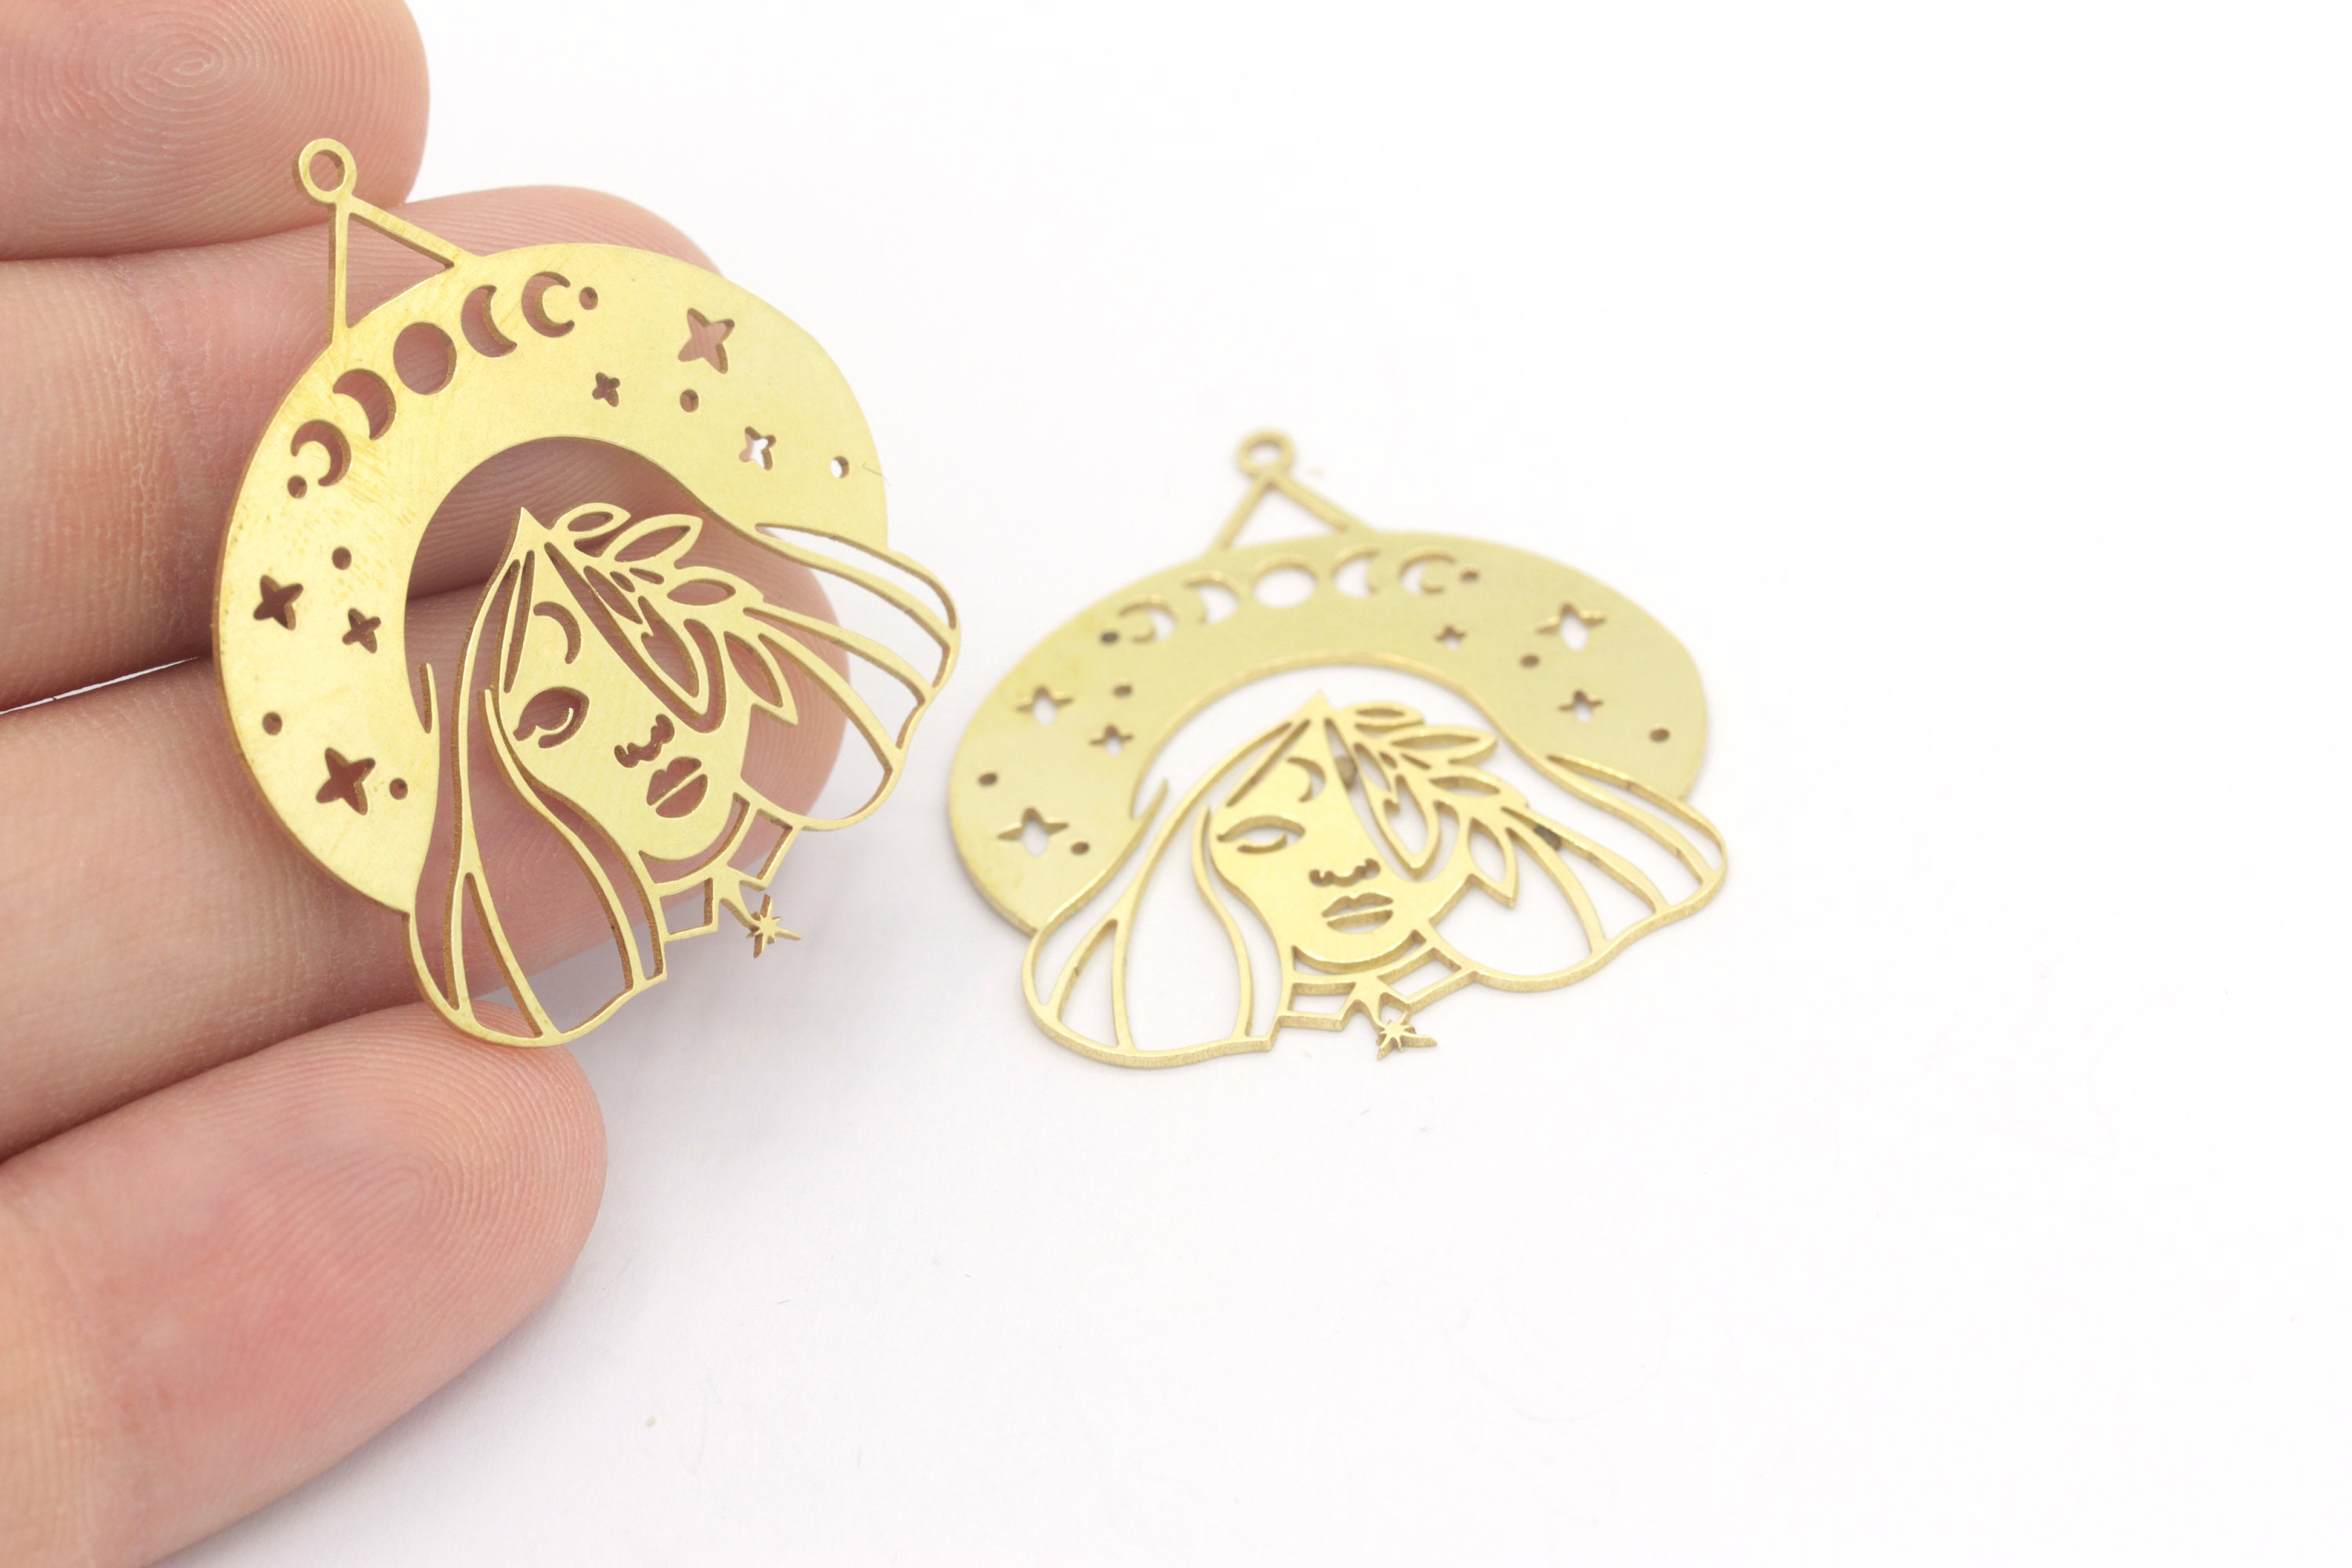 2pcs Raw Brass Witch Hat Charm, Moon Phases Witch Hat Charm, Halloween Charms, Witchy Charms, Laser Cut Jewelry Making Supplies RW-1569